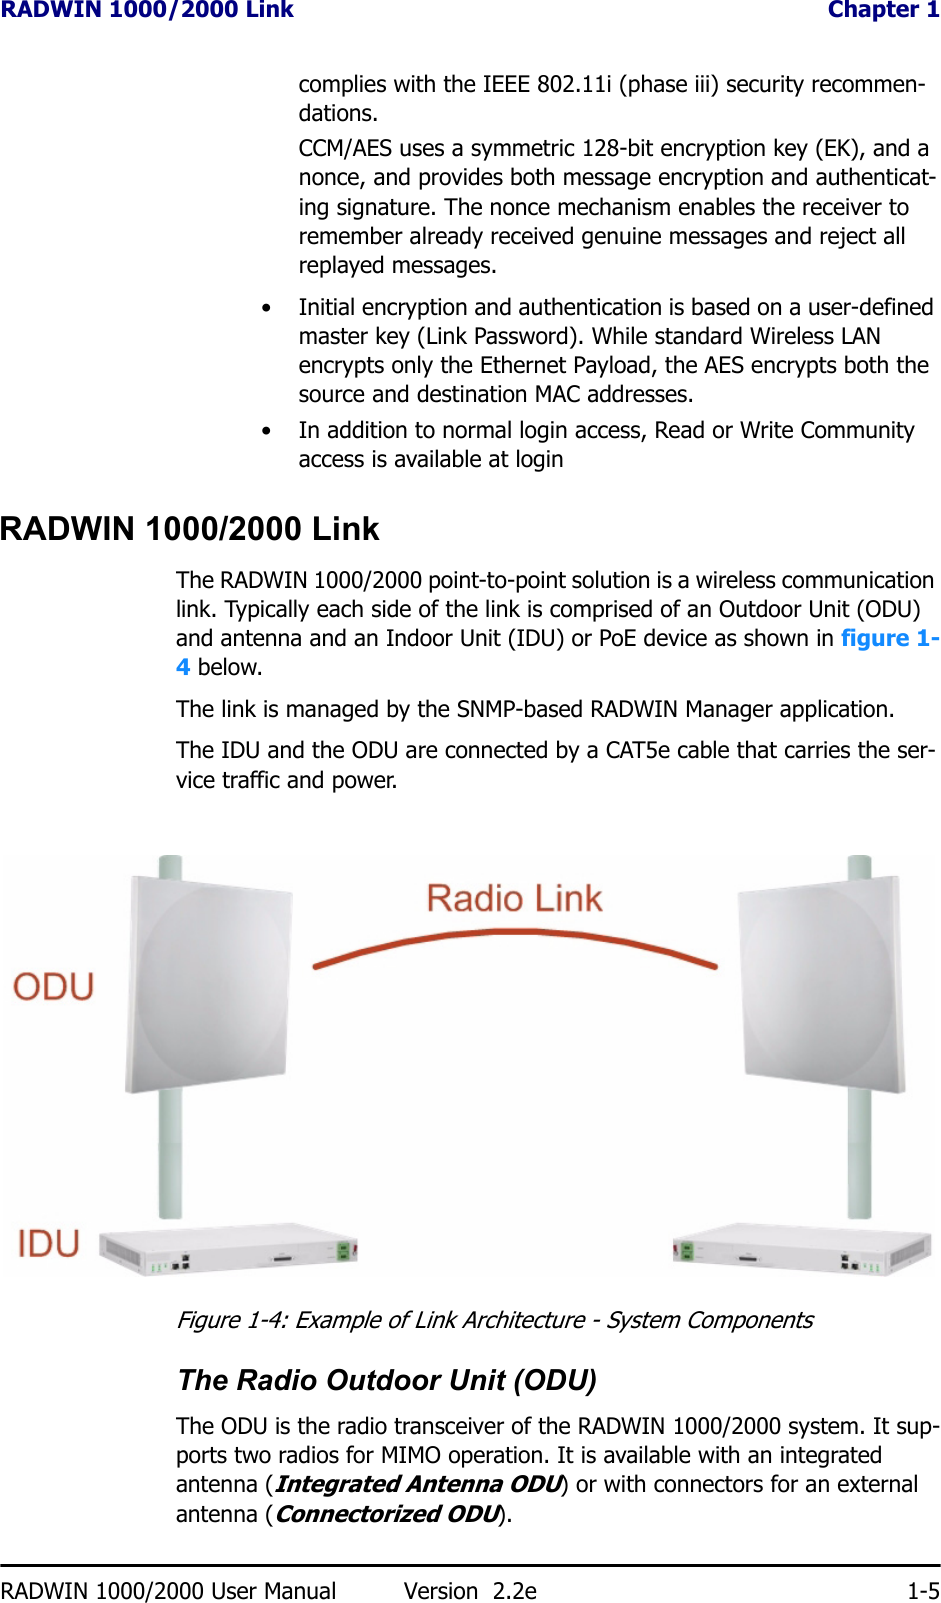 RADWIN 1000/2000 Link  Chapter 1RADWIN 1000/2000 User Manual Version  2.2e 1-5complies with the IEEE 802.11i (phase iii) security recommen-dations.CCM/AES uses a symmetric 128-bit encryption key (EK), and a nonce, and provides both message encryption and authenticat-ing signature. The nonce mechanism enables the receiver to remember already received genuine messages and reject all replayed messages.• Initial encryption and authentication is based on a user-defined master key (Link Password). While standard Wireless LAN encrypts only the Ethernet Payload, the AES encrypts both the source and destination MAC addresses.• In addition to normal login access, Read or Write Community access is available at loginRADWIN 1000/2000 LinkThe RADWIN 1000/2000 point-to-point solution is a wireless communication link. Typically each side of the link is comprised of an Outdoor Unit (ODU) and antenna and an Indoor Unit (IDU) or PoE device as shown in figure 1-4 below.The link is managed by the SNMP-based RADWIN Manager application.The IDU and the ODU are connected by a CAT5e cable that carries the ser-vice traffic and power. Figure 1-4: Example of Link Architecture - System ComponentsThe Radio Outdoor Unit (ODU)The ODU is the radio transceiver of the RADWIN 1000/2000 system. It sup-ports two radios for MIMO operation. It is available with an integrated antenna (Integrated Antenna ODU) or with connectors for an external antenna (Connectorized ODU).